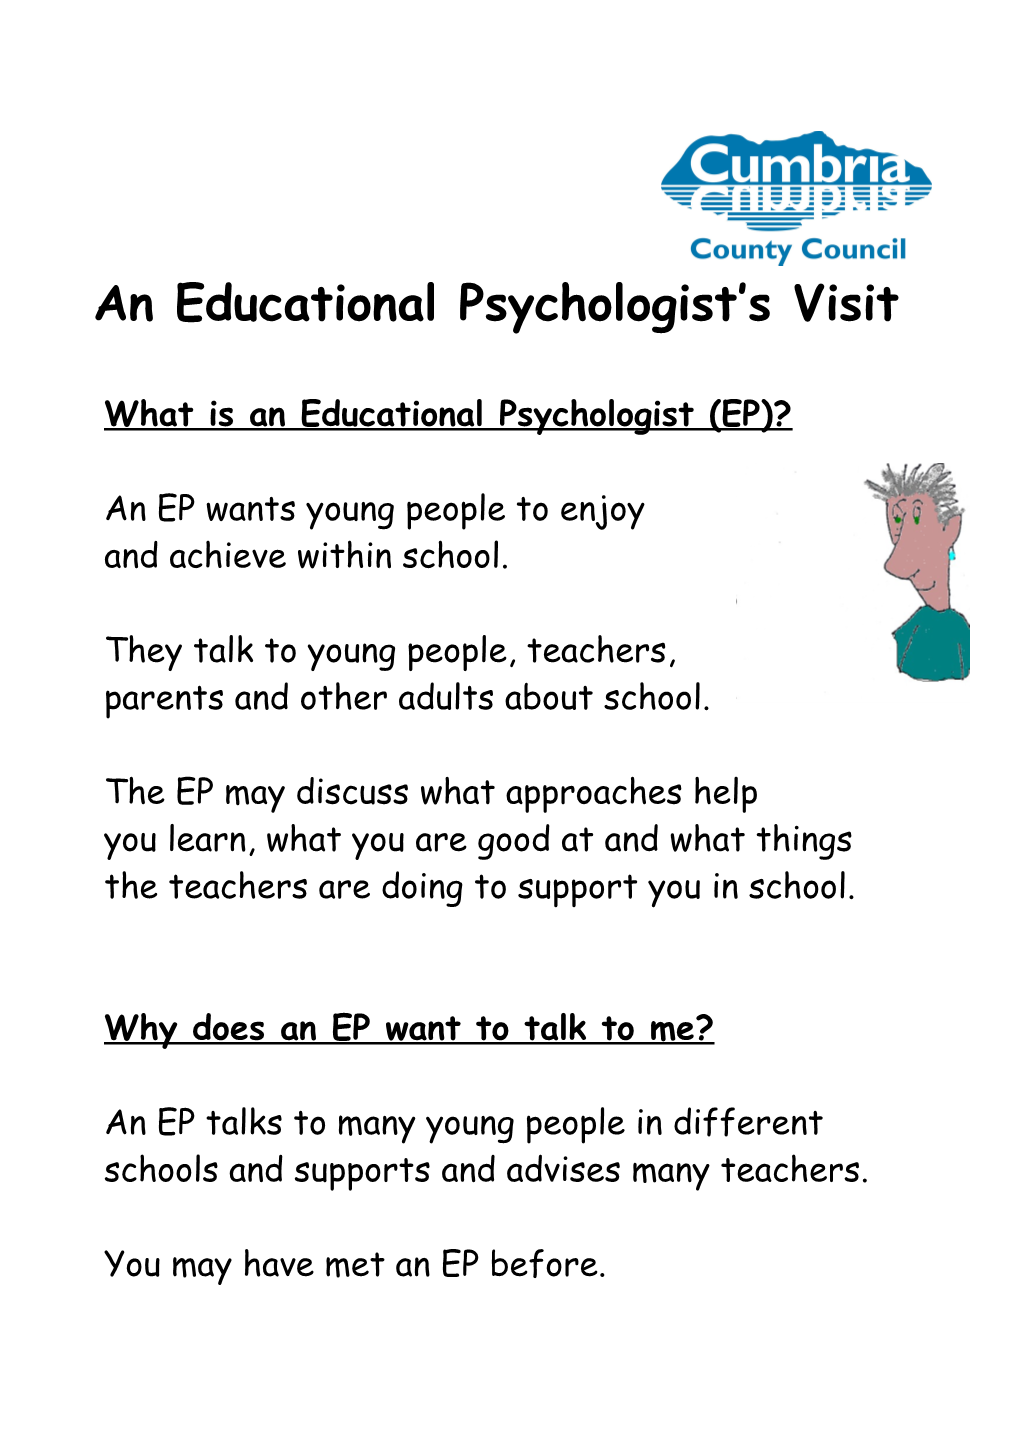 An Educational Psychologist Comes to Our School